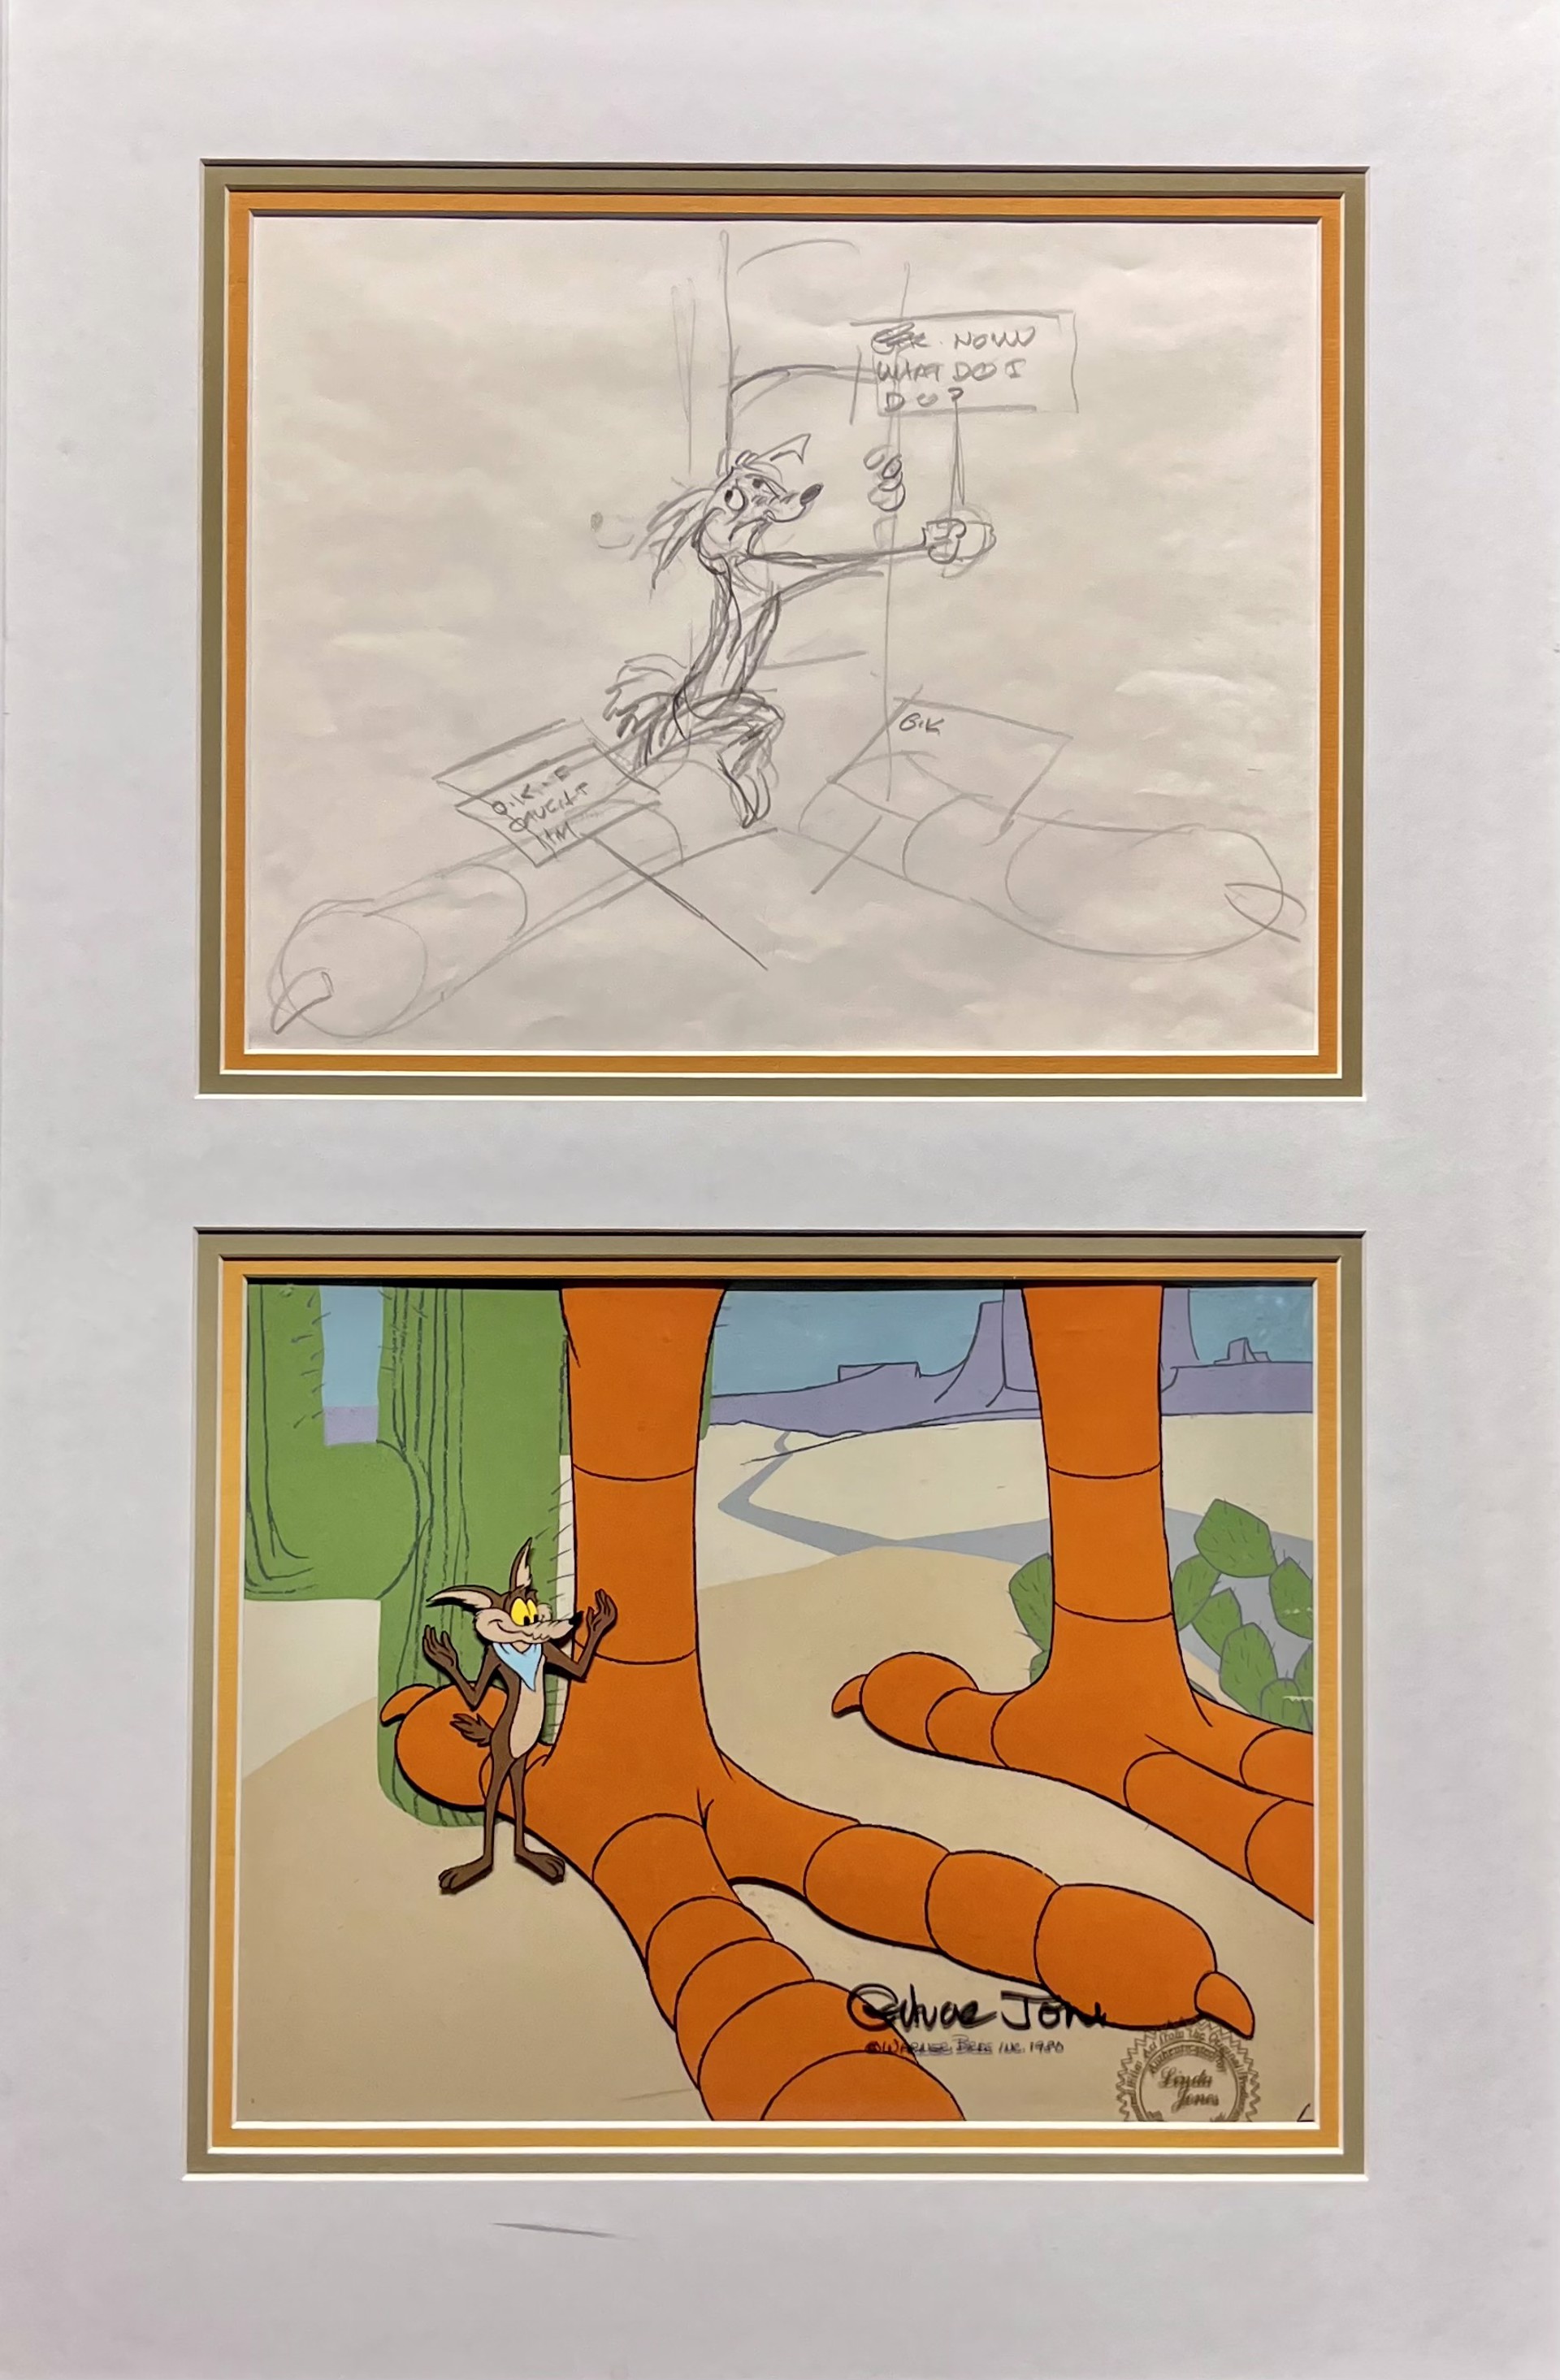 Wile E. Coyote, RR Feet and Concept Drawing, Chariots of Fur, CJ53-100-35 by Chuck Jones